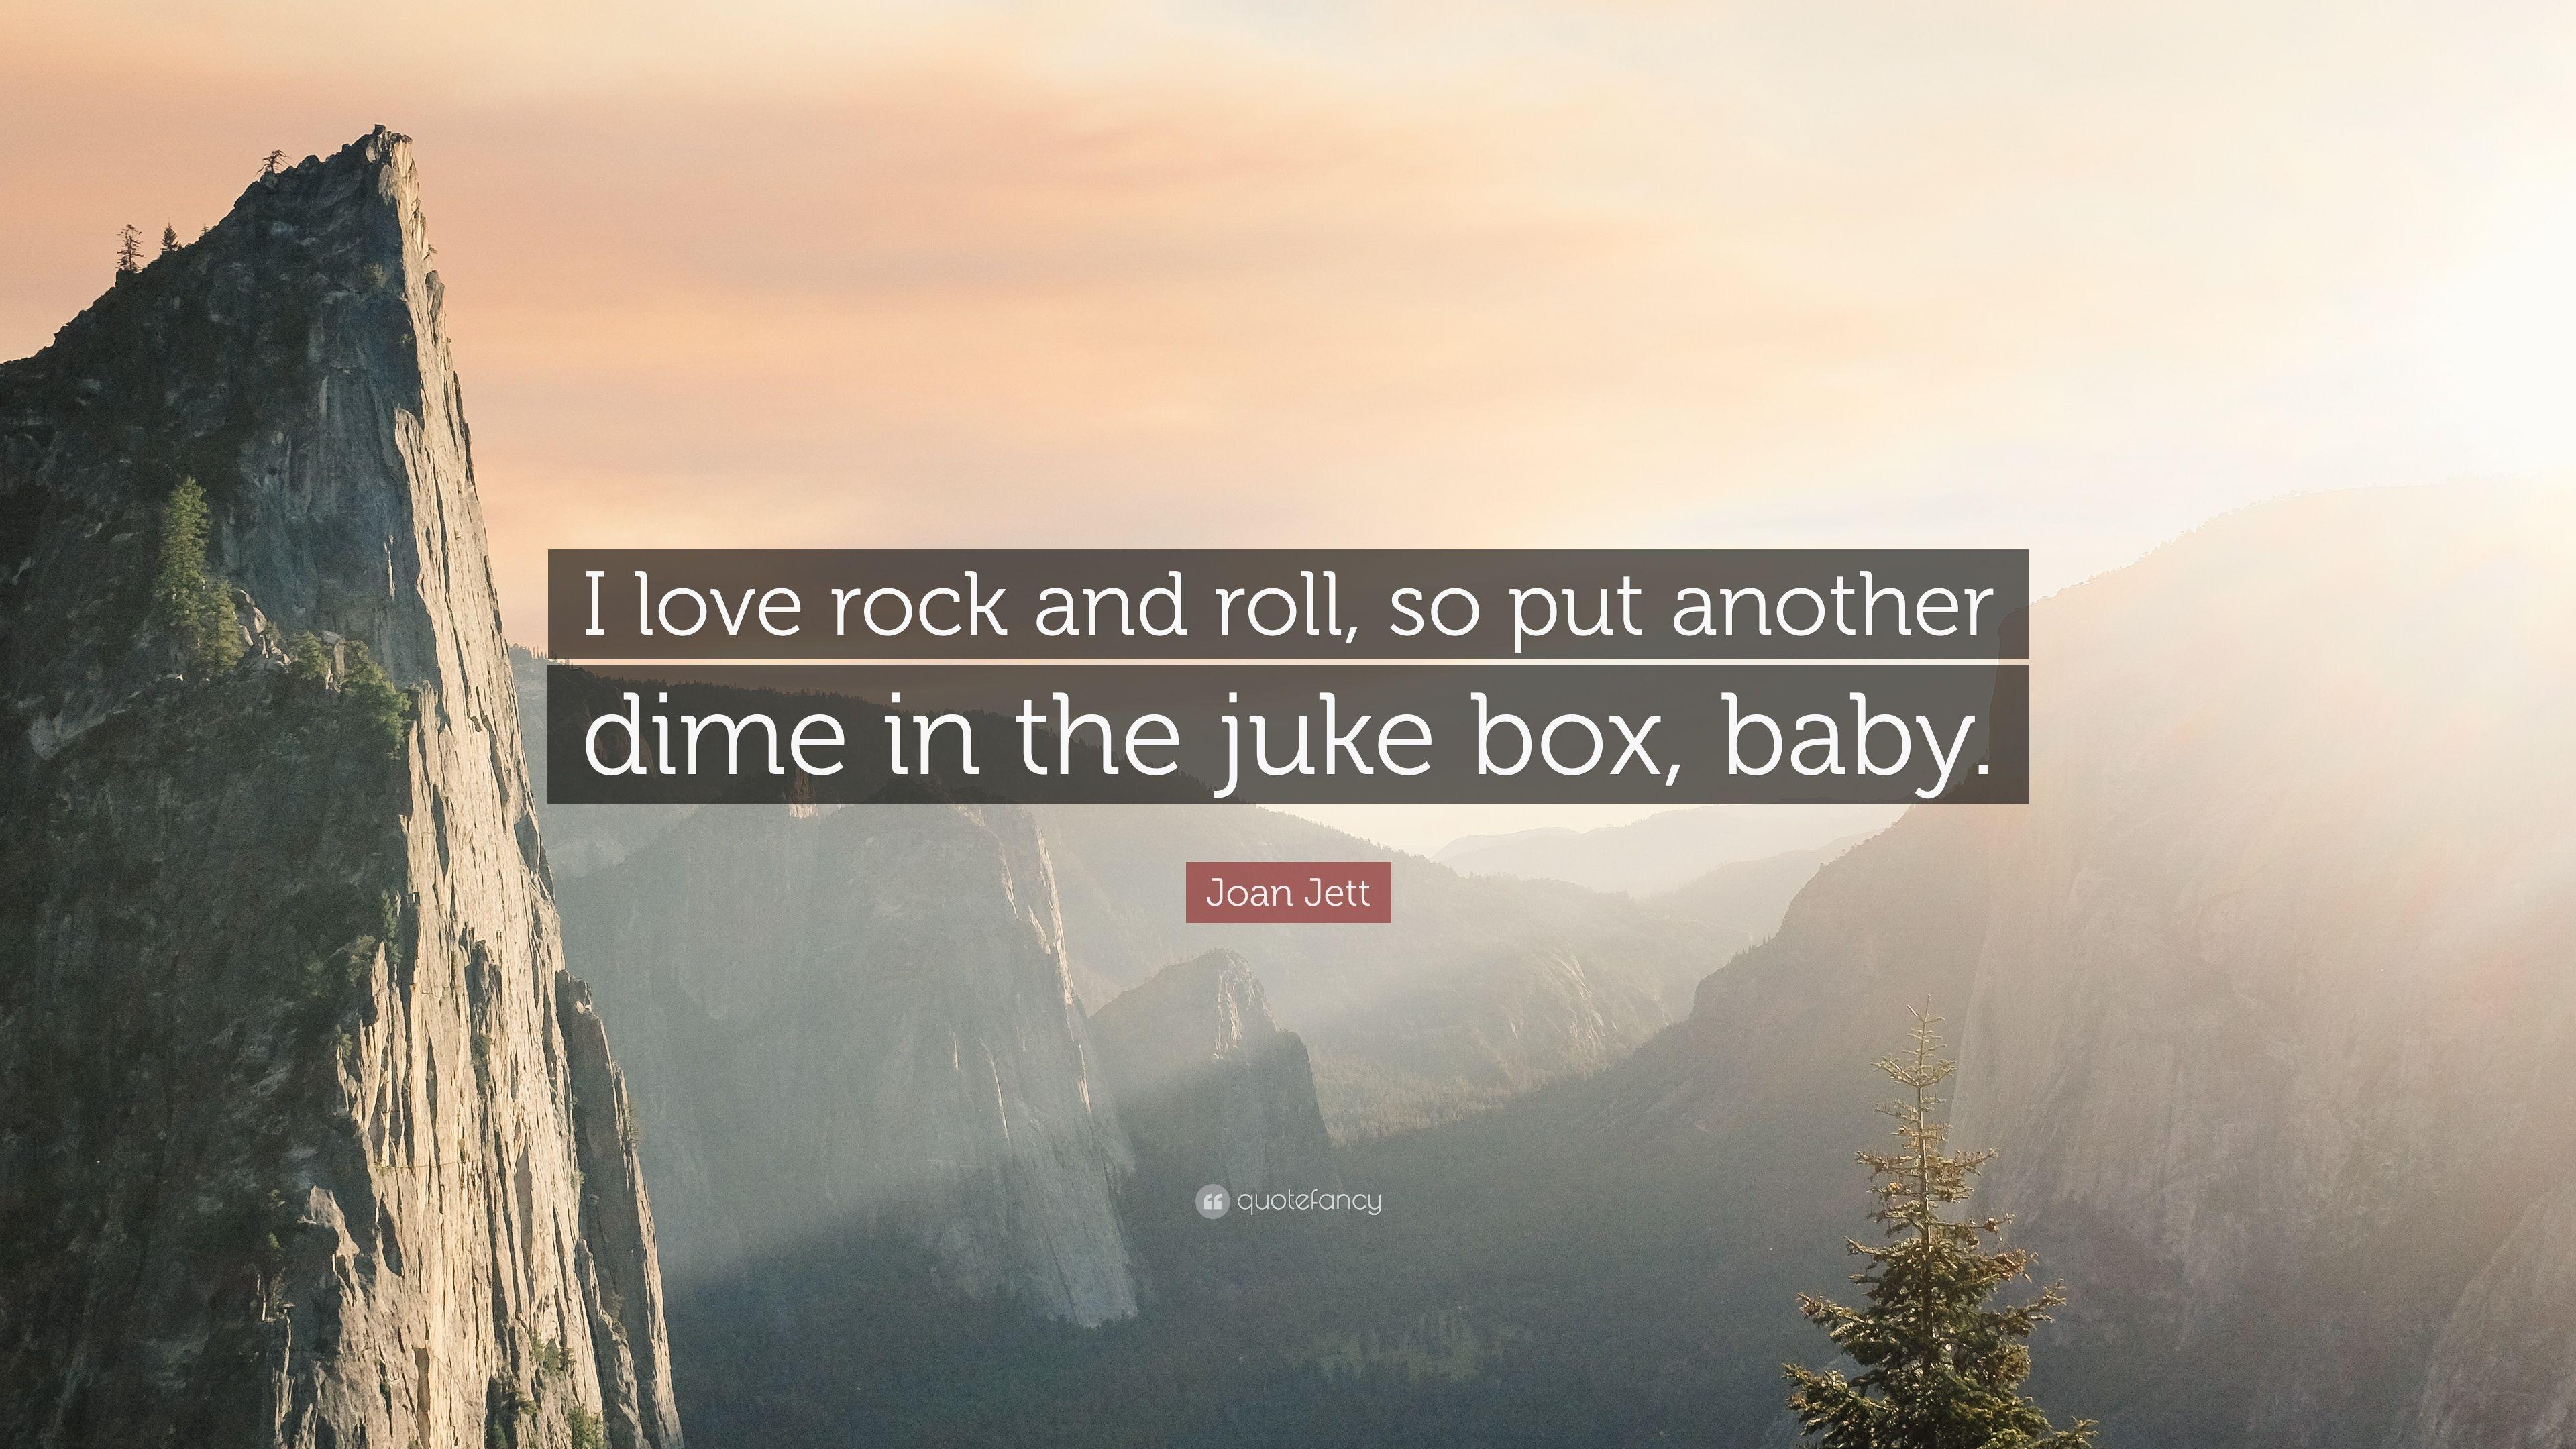 Joan Jett Quote: “I love rock and roll, so put another dime in